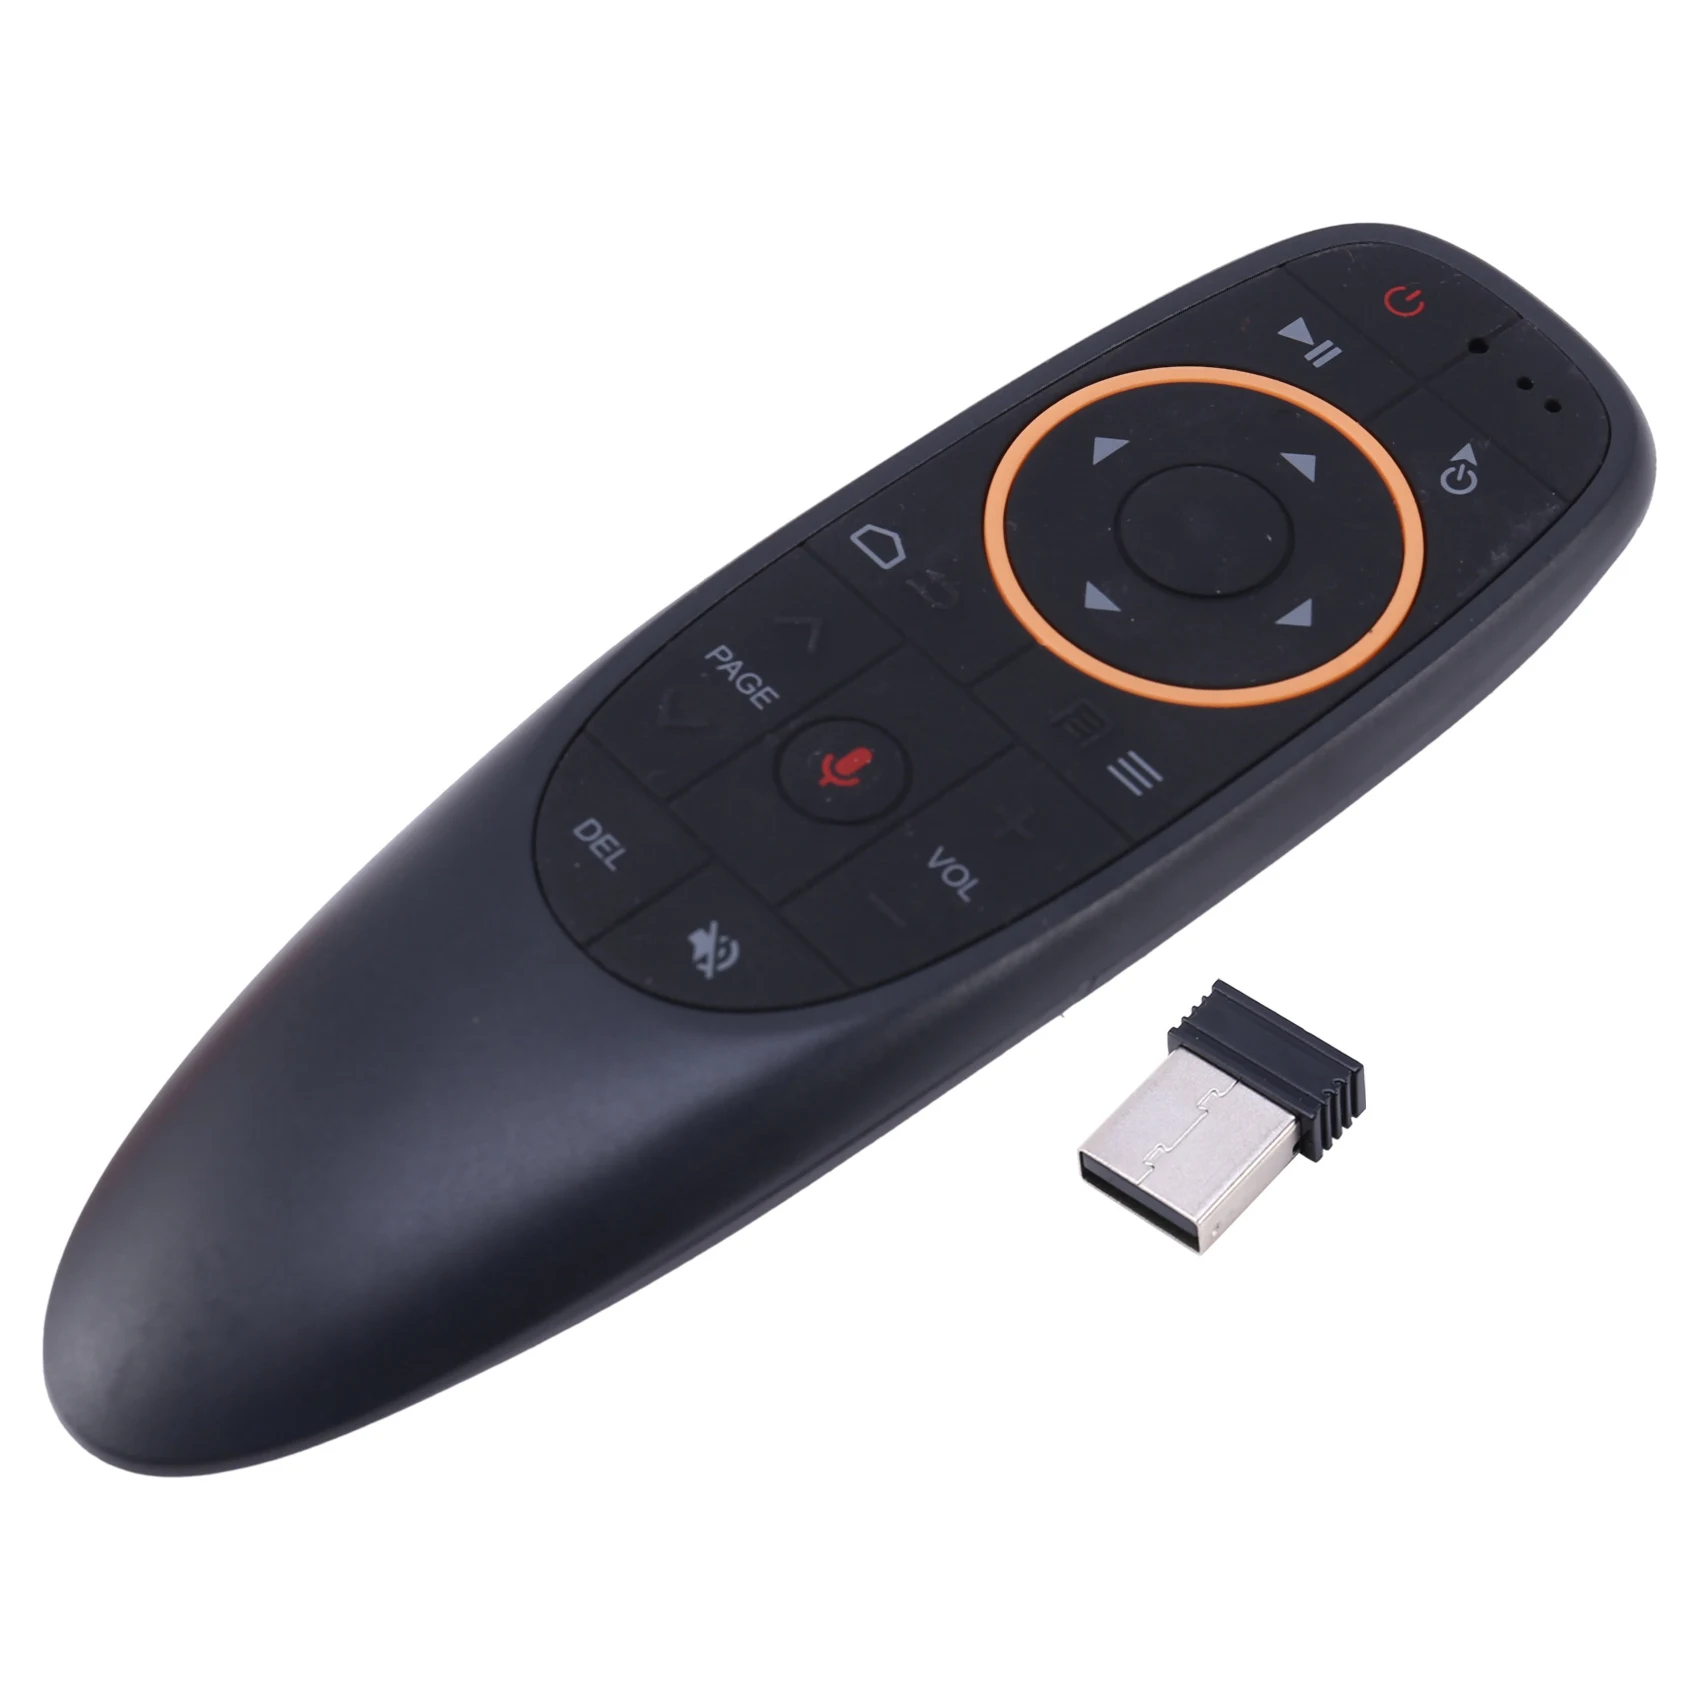 

G10 Voice Air Mouse Remote, 2.4Ghz Mini Wireless Android TV Control & Infrared Learning Microphone for Computer PC Android TV